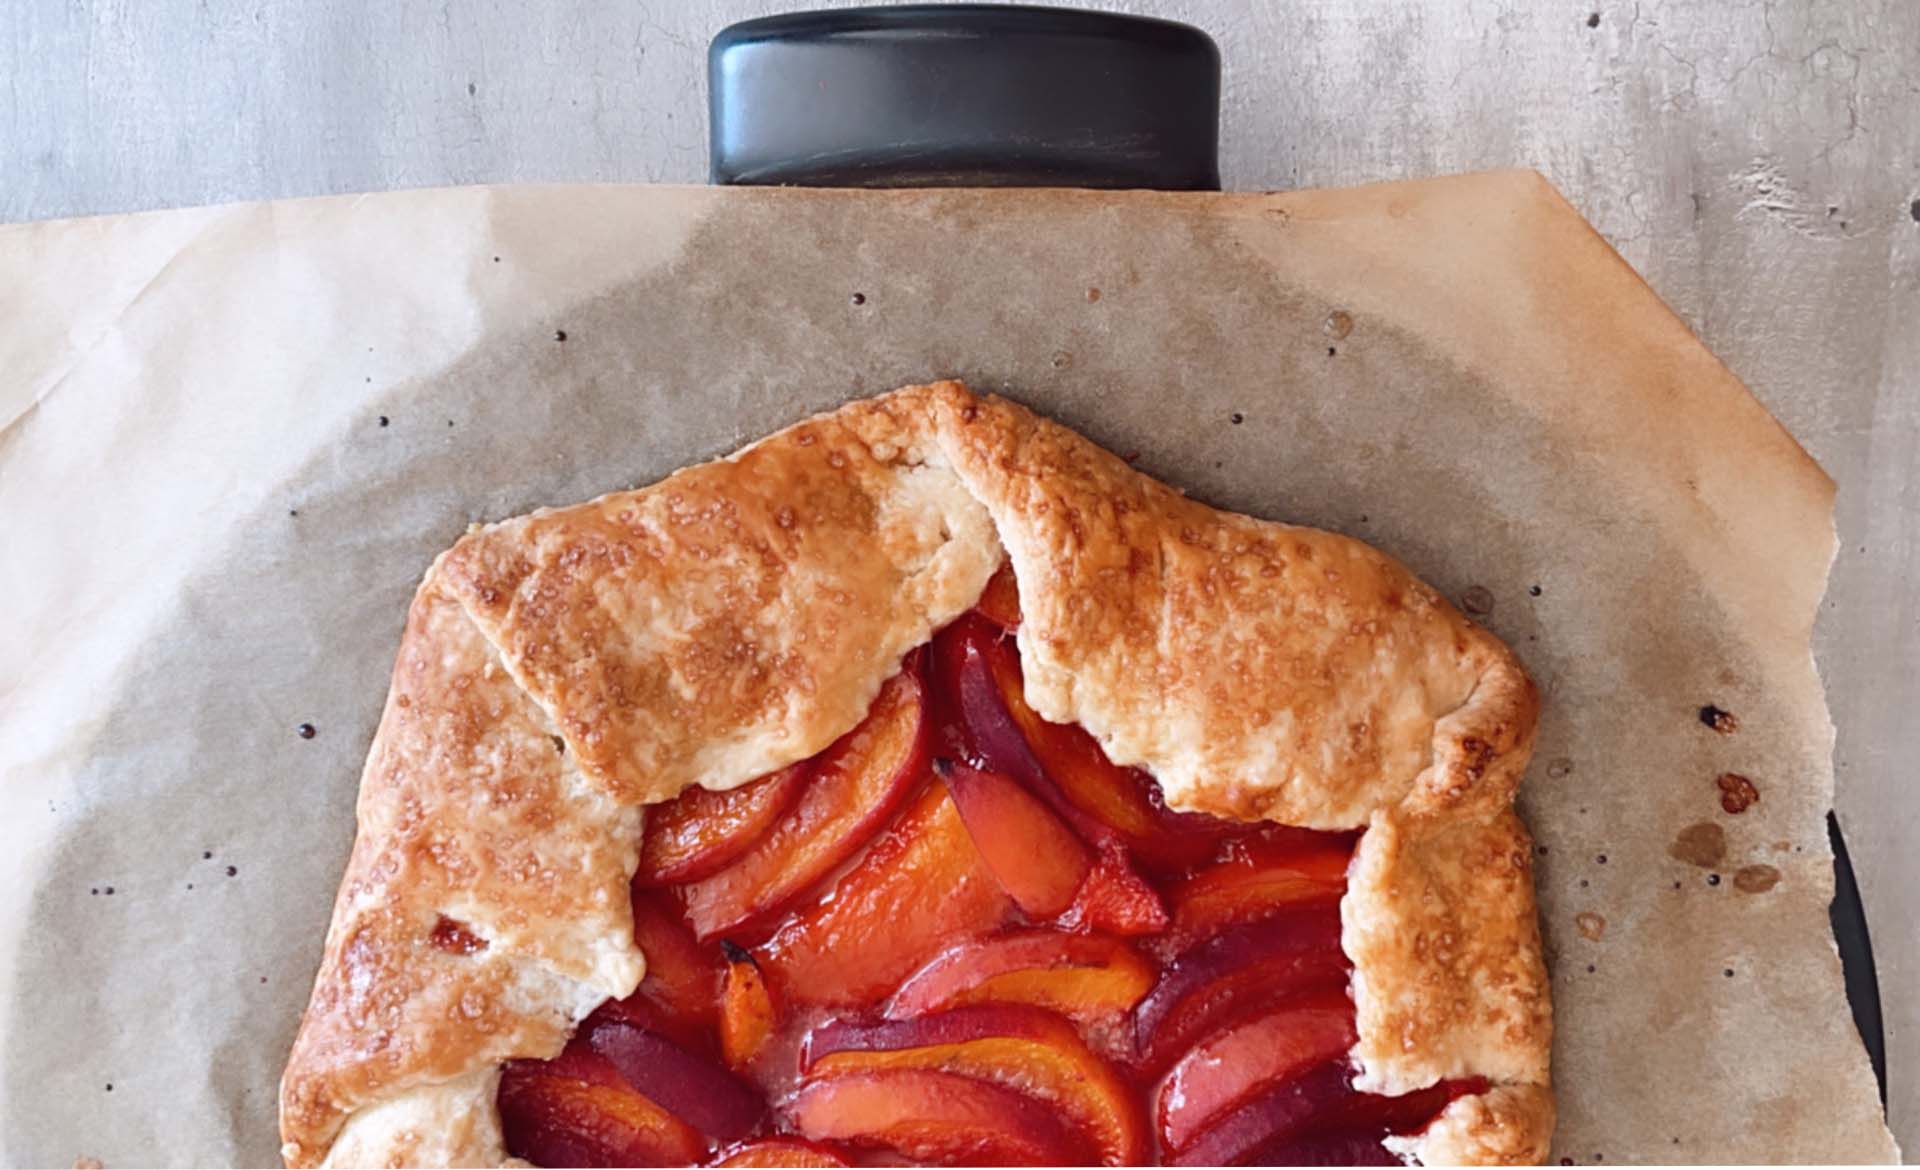 A peachy keen galette on parchment paper waiting to be served.